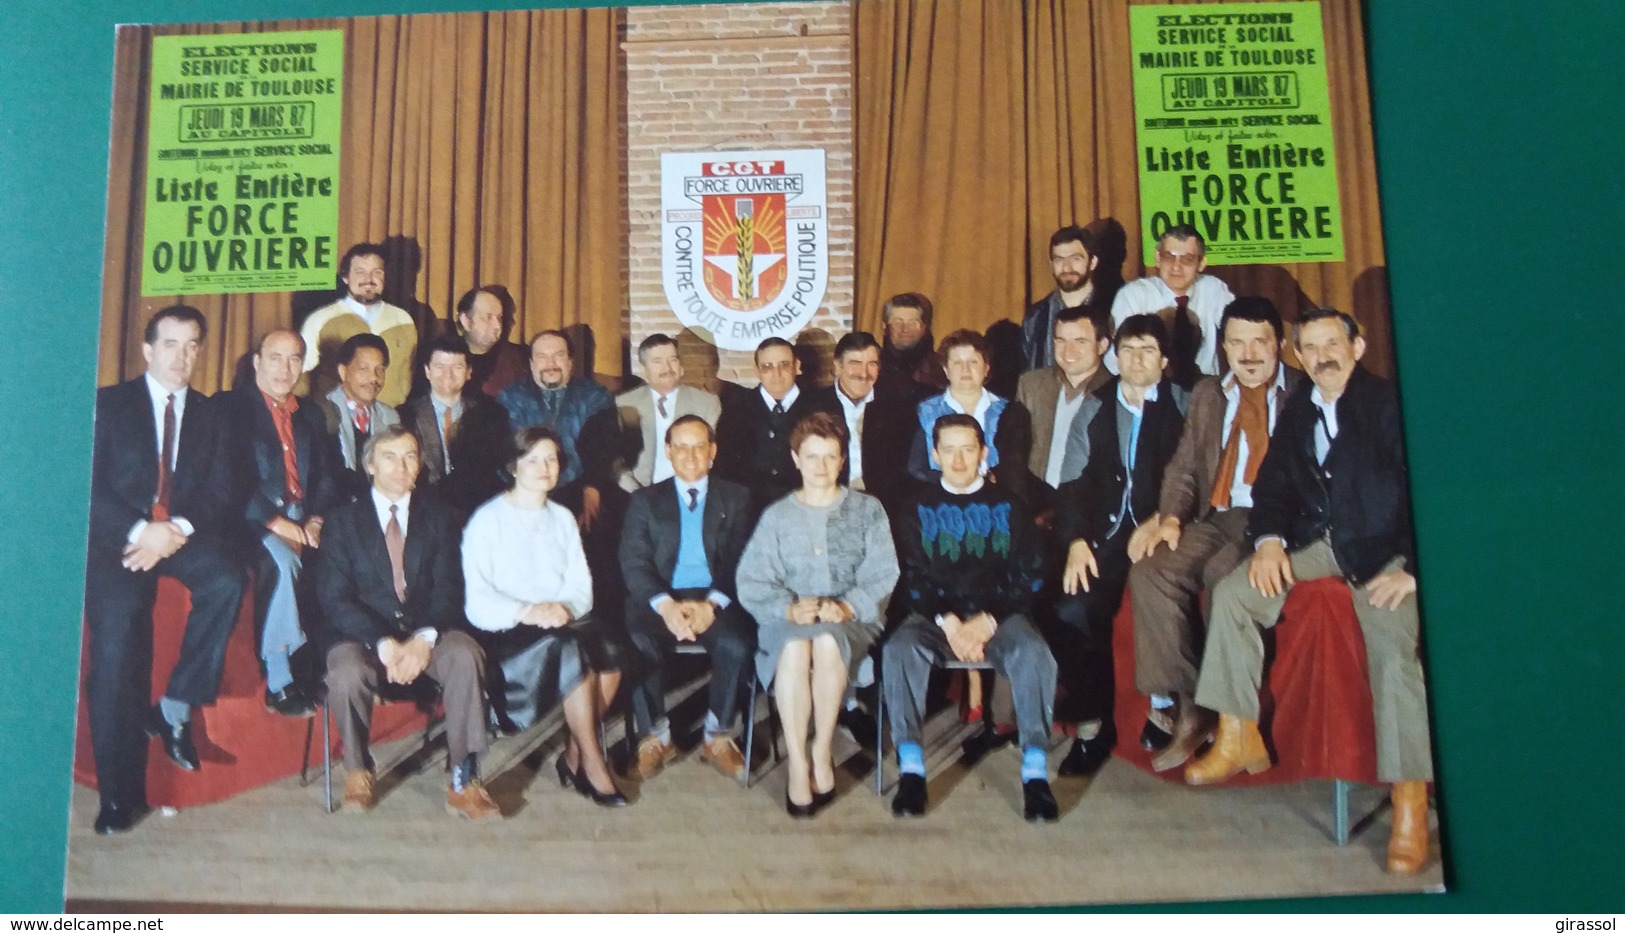 CPSM SYNDICAT FORCE OUVRIERE ELACTION MARS 1987 MAIRIE DE TOULOUSE ED LARREY EQUIPE CANDIDATS ? - Gewerkschaften